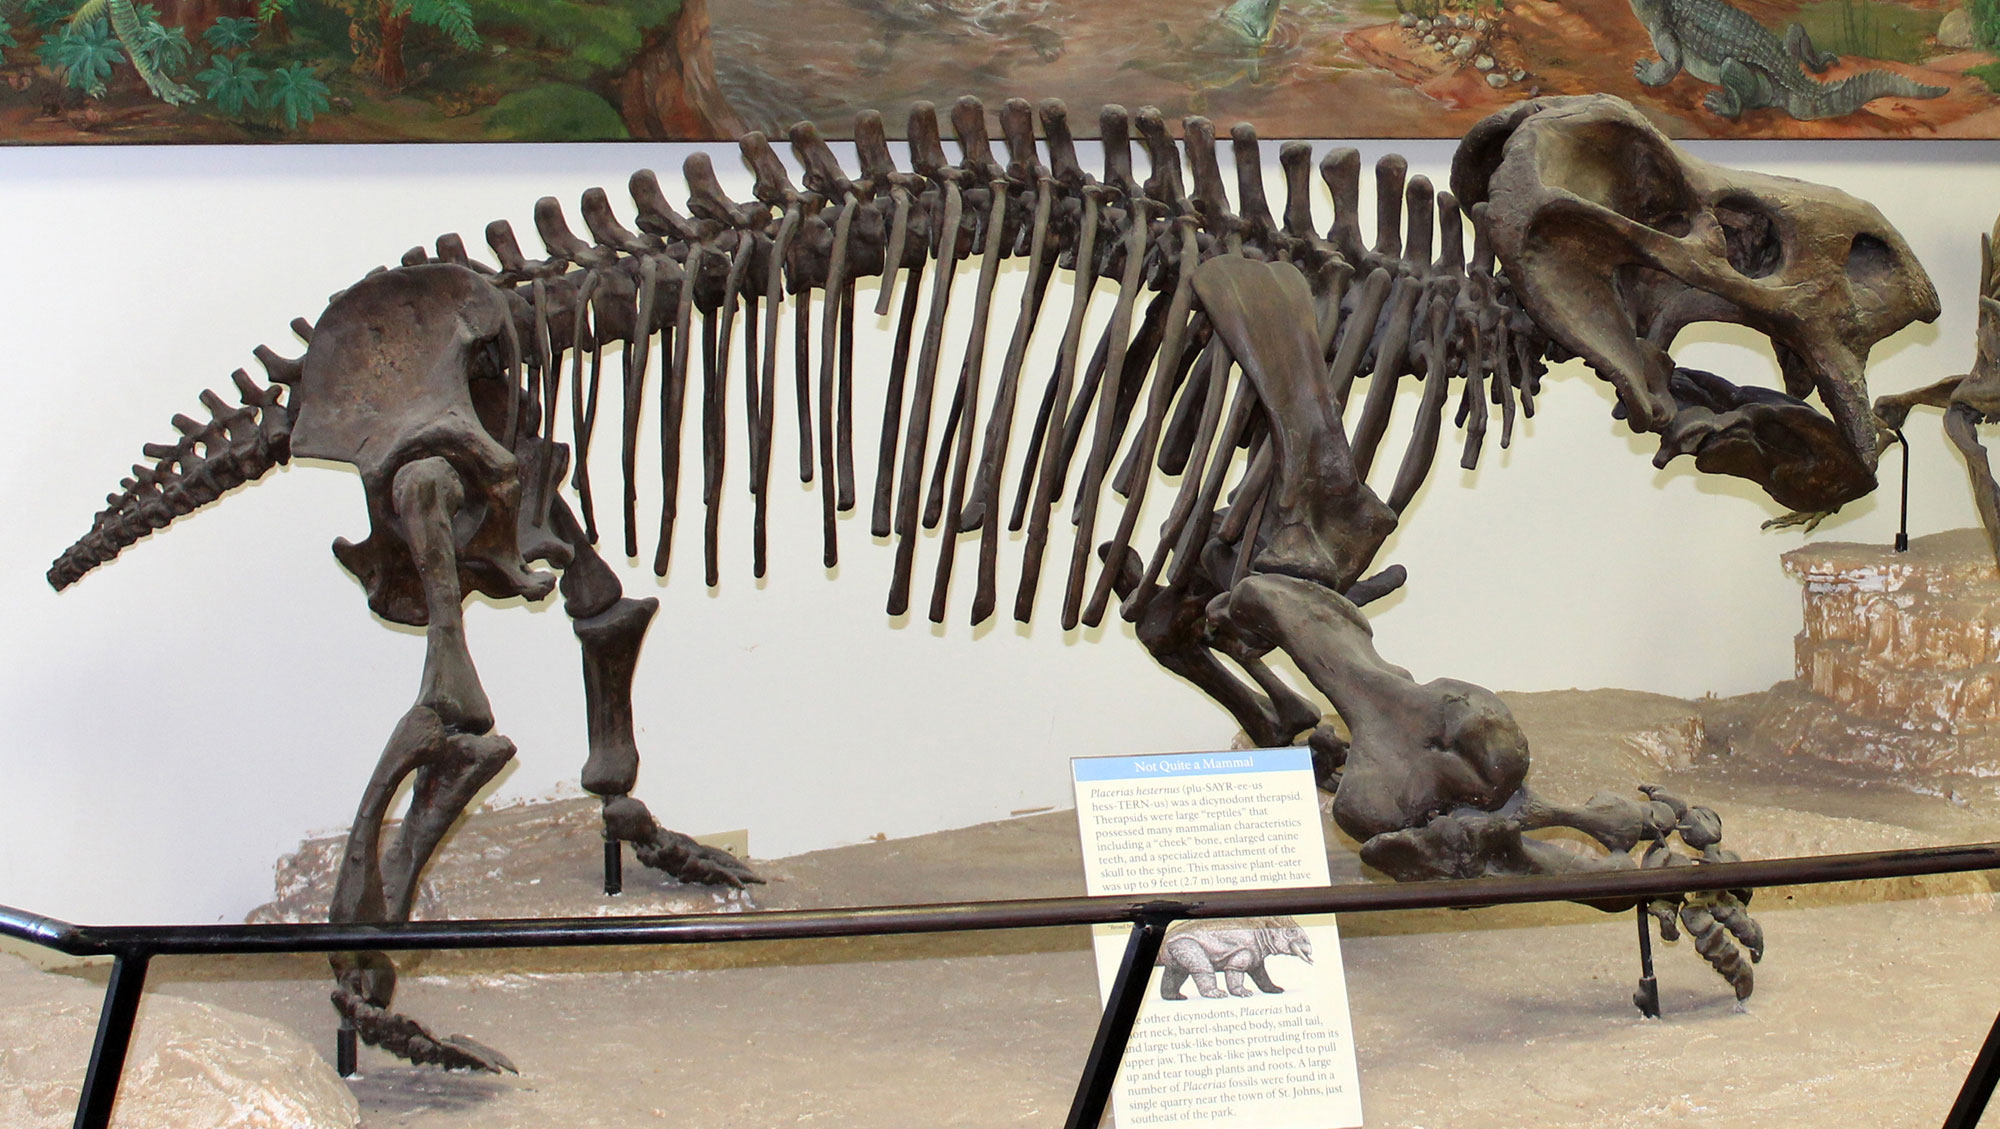 Photograph of a cast of the skeleton of Placerias on display at Petrified Forest National Park. The animal is stout with four legs and a bizarre skull. The skull features two large, tooth-like projections in the maxilla (upper jaw), one on each side of the face.